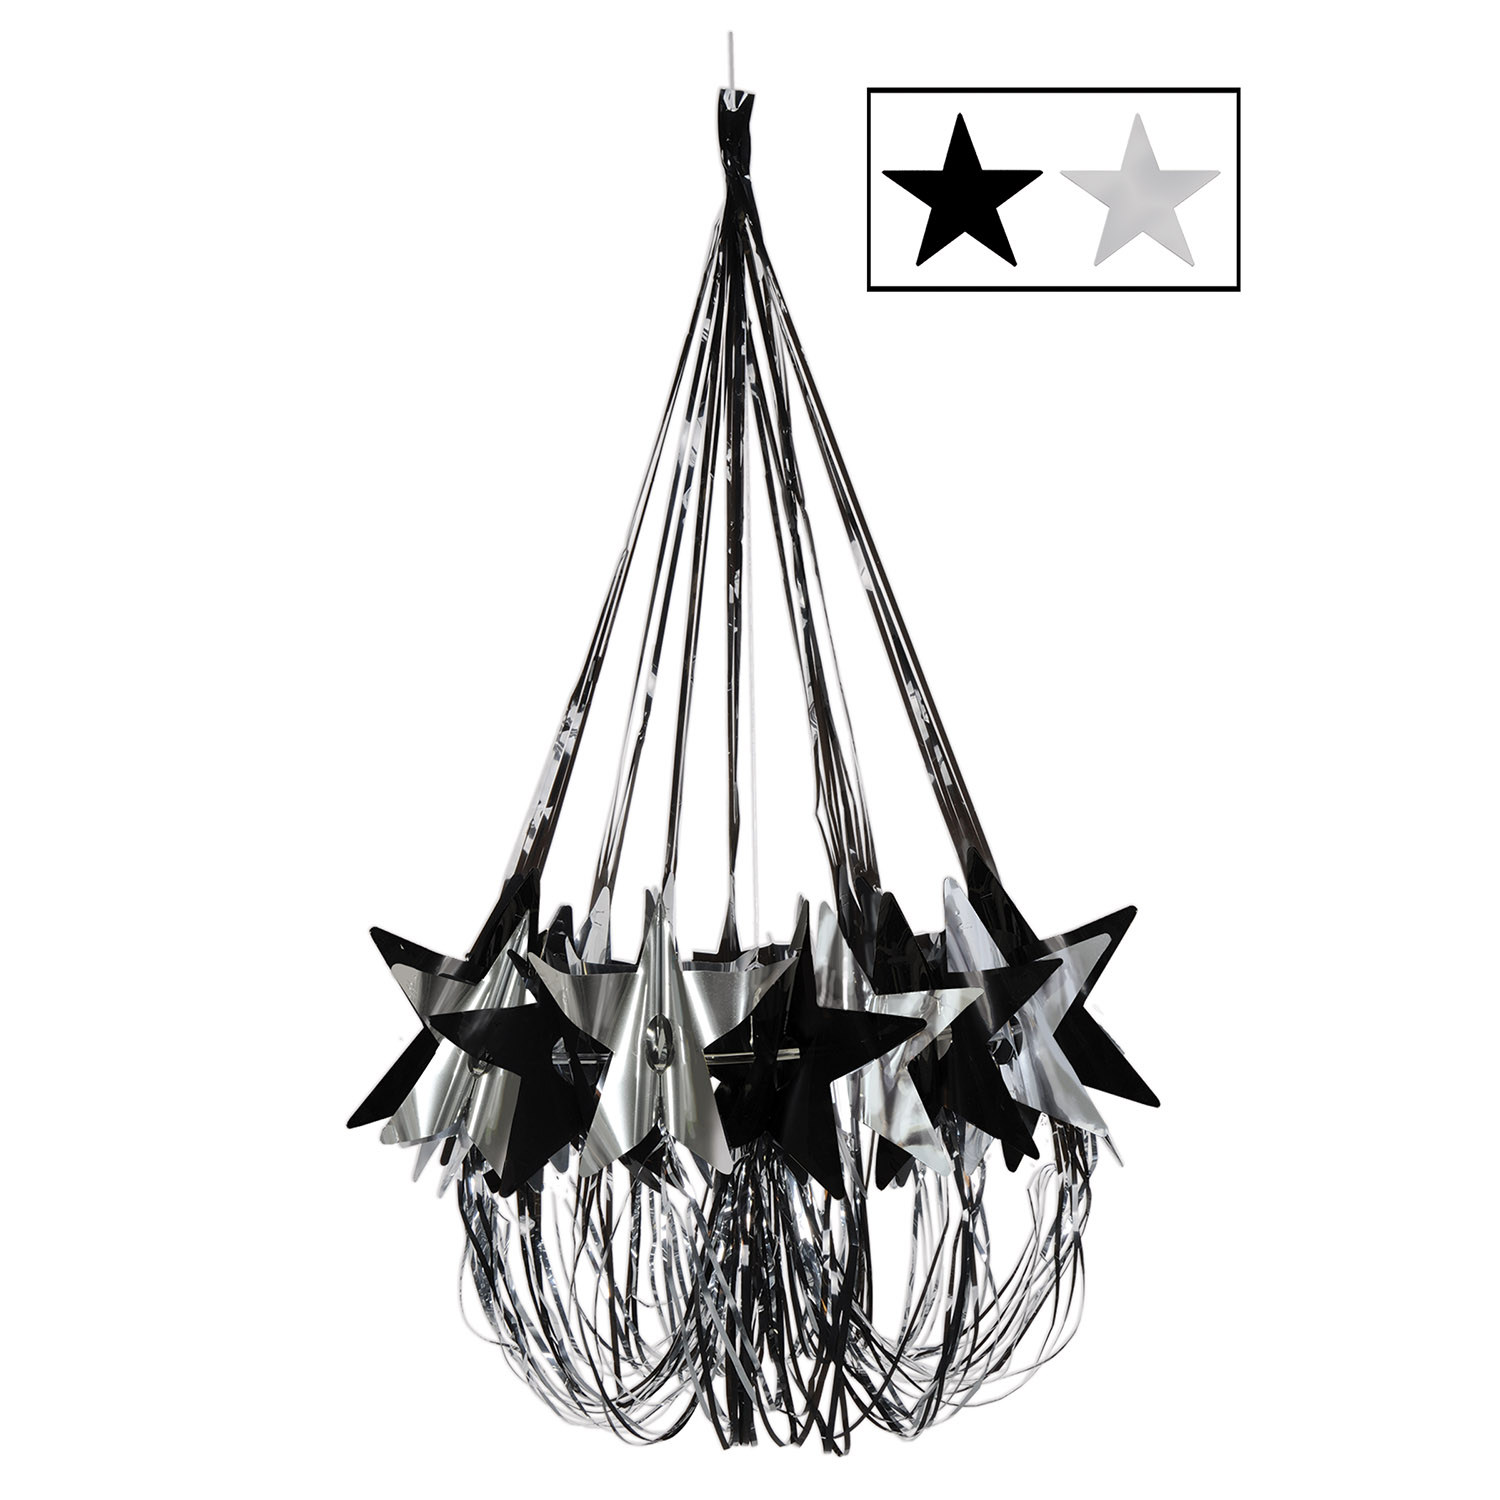 Chandelier decor with black and silver accents and stars.